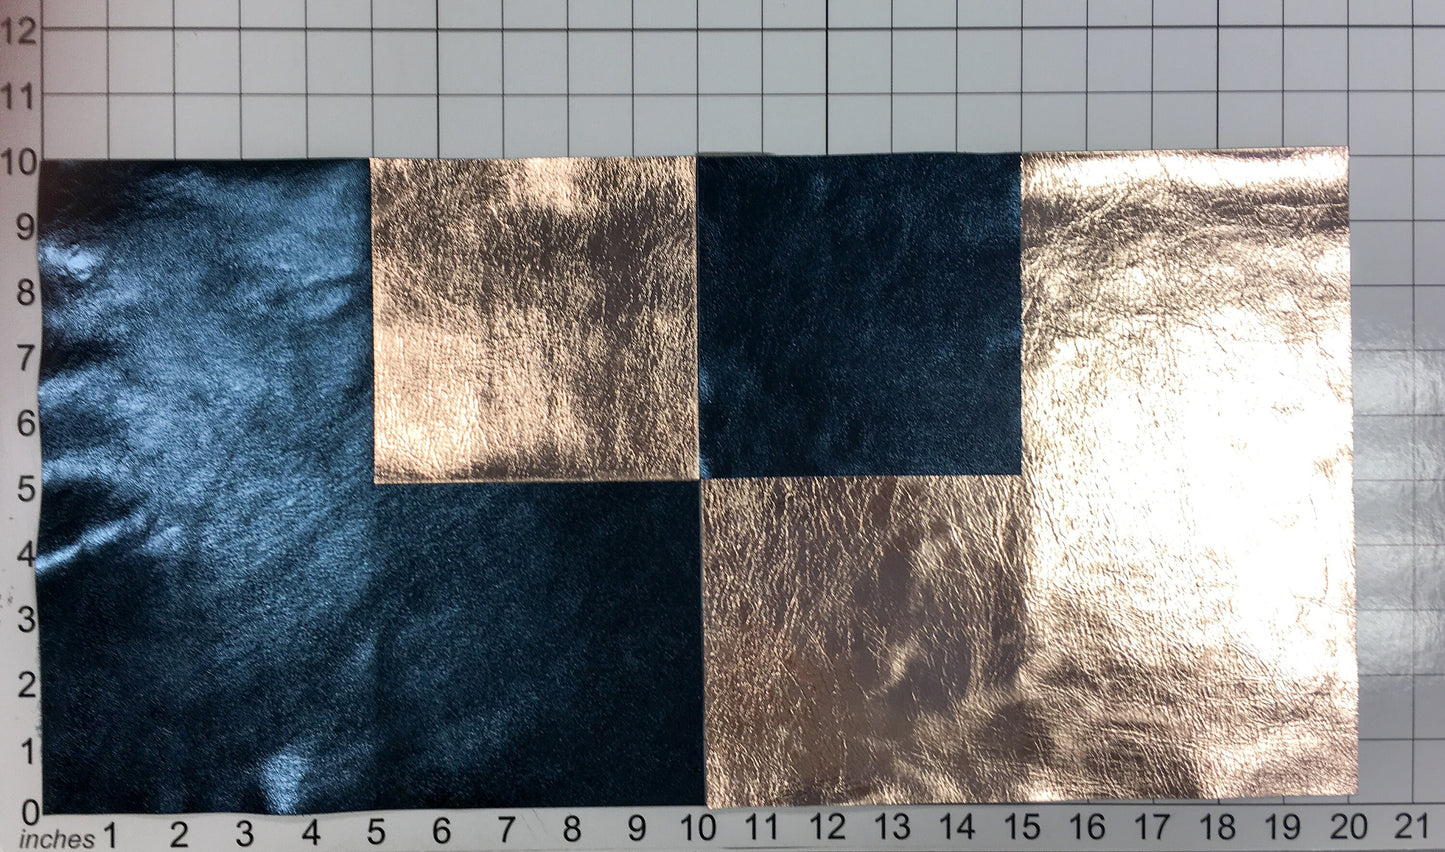 Rose Gold and Teal Metallic Lambskin 5x5inch Scraps 4 Shiny Pieces